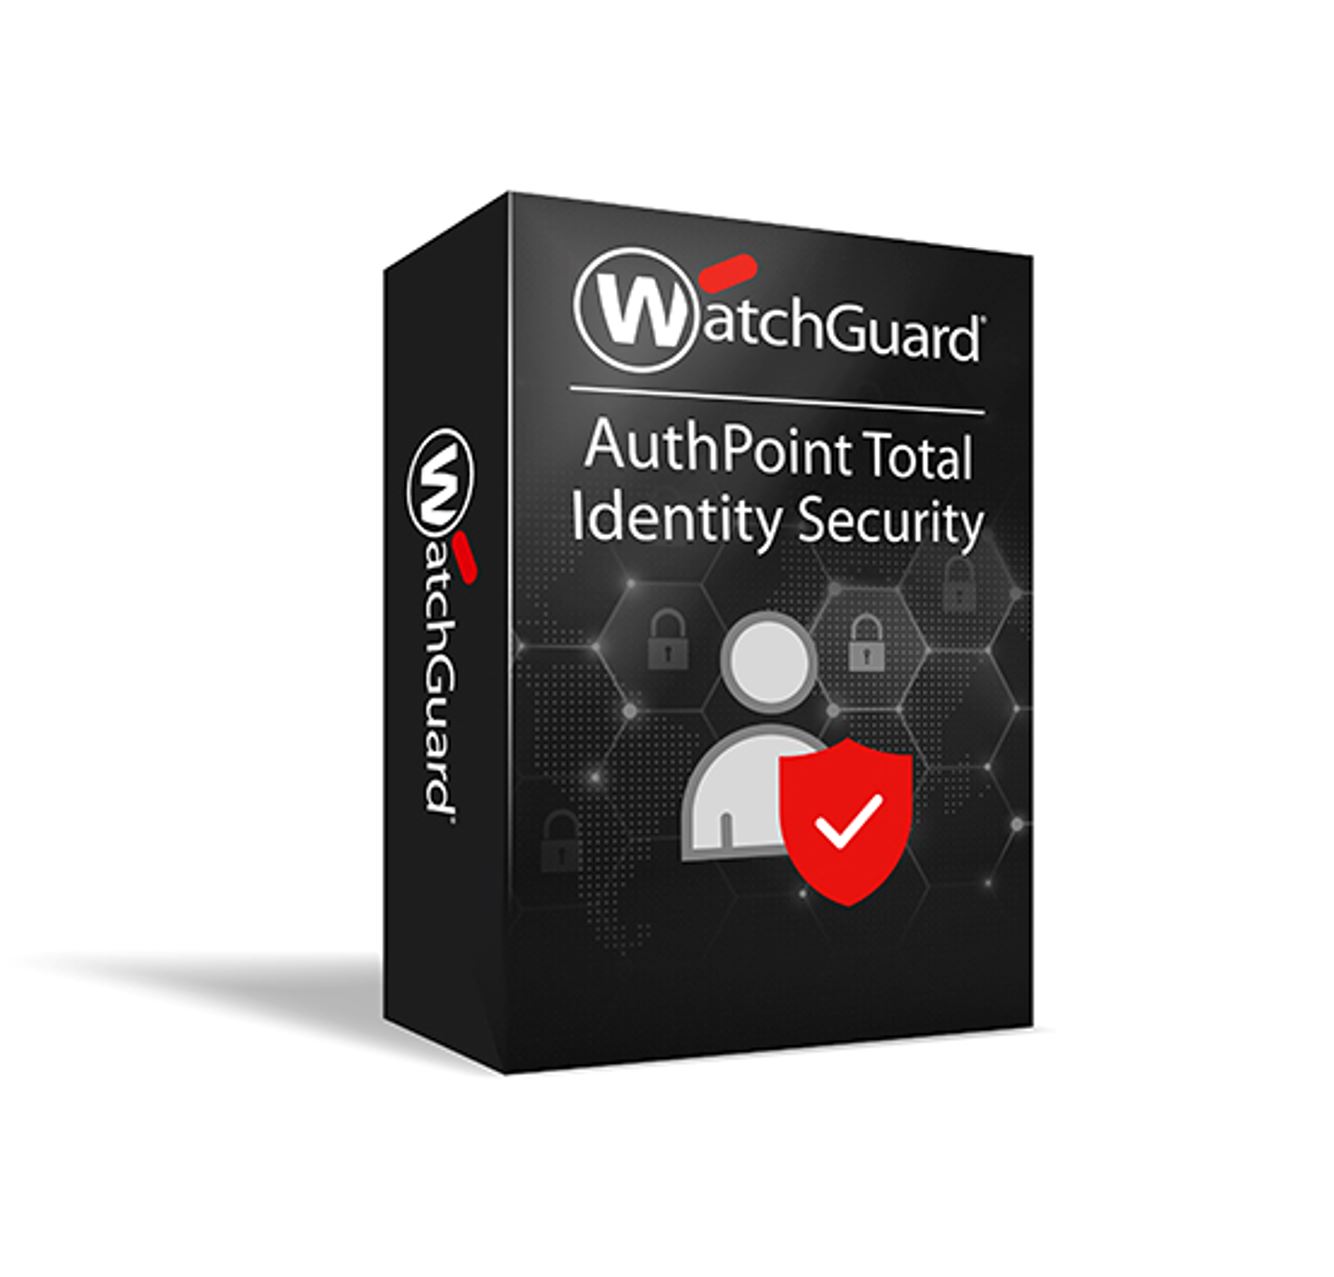 WatchGuard AuthPoint Total Identity Security  3 Year  5001 users